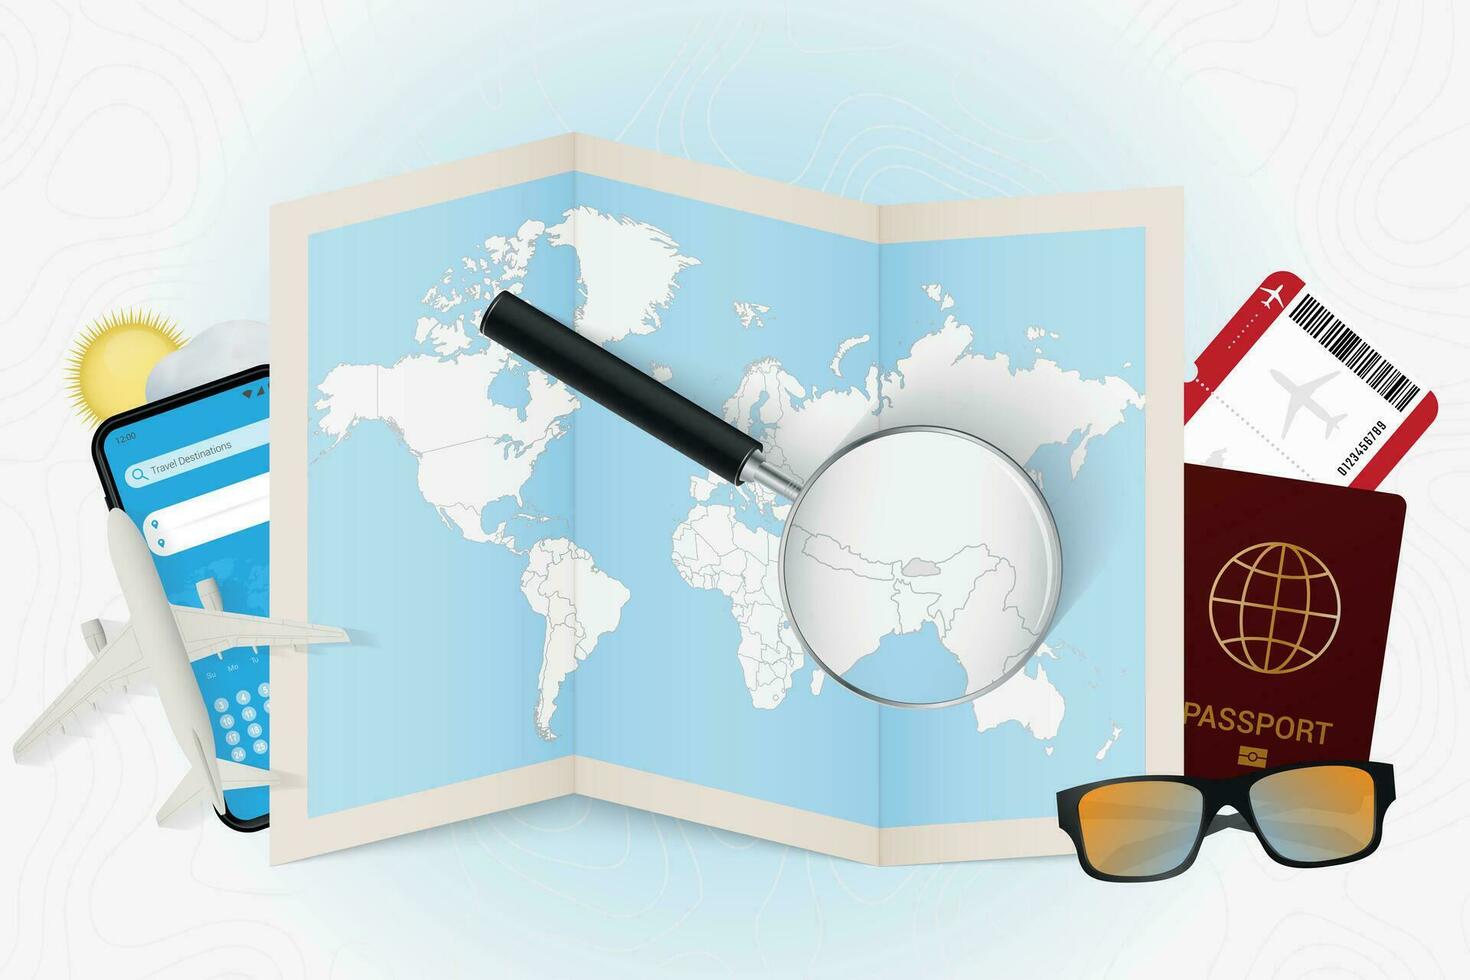 Travel destination Bhutan, tourism mockup with travel equipment and world map with magnifying glass on a Bhutan. vector